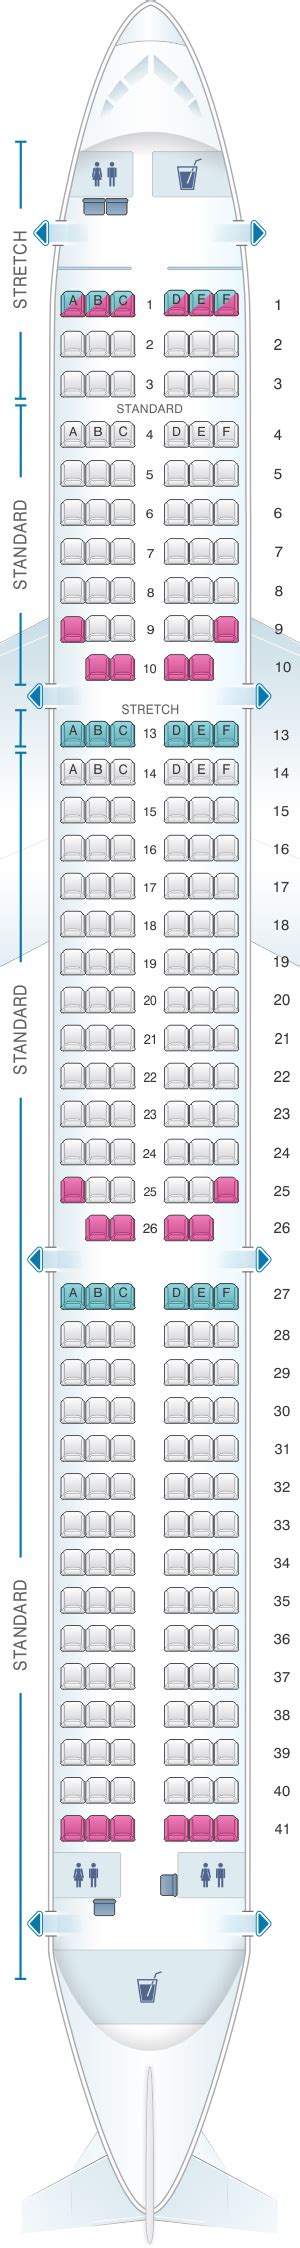 Frontier Seat Map. Reviews. Seating. Charts. Not sure what plane you're on? Click here to search for a specific flight, set aircraft change alerts, schedule change alerts, and more. Jump to: Amenities, Reviews, Photos, Seat list, Our take, Map key. Seatlink's take. The Frontier Airbus A321 features 230 seats in a 2 cabin configuration.. 